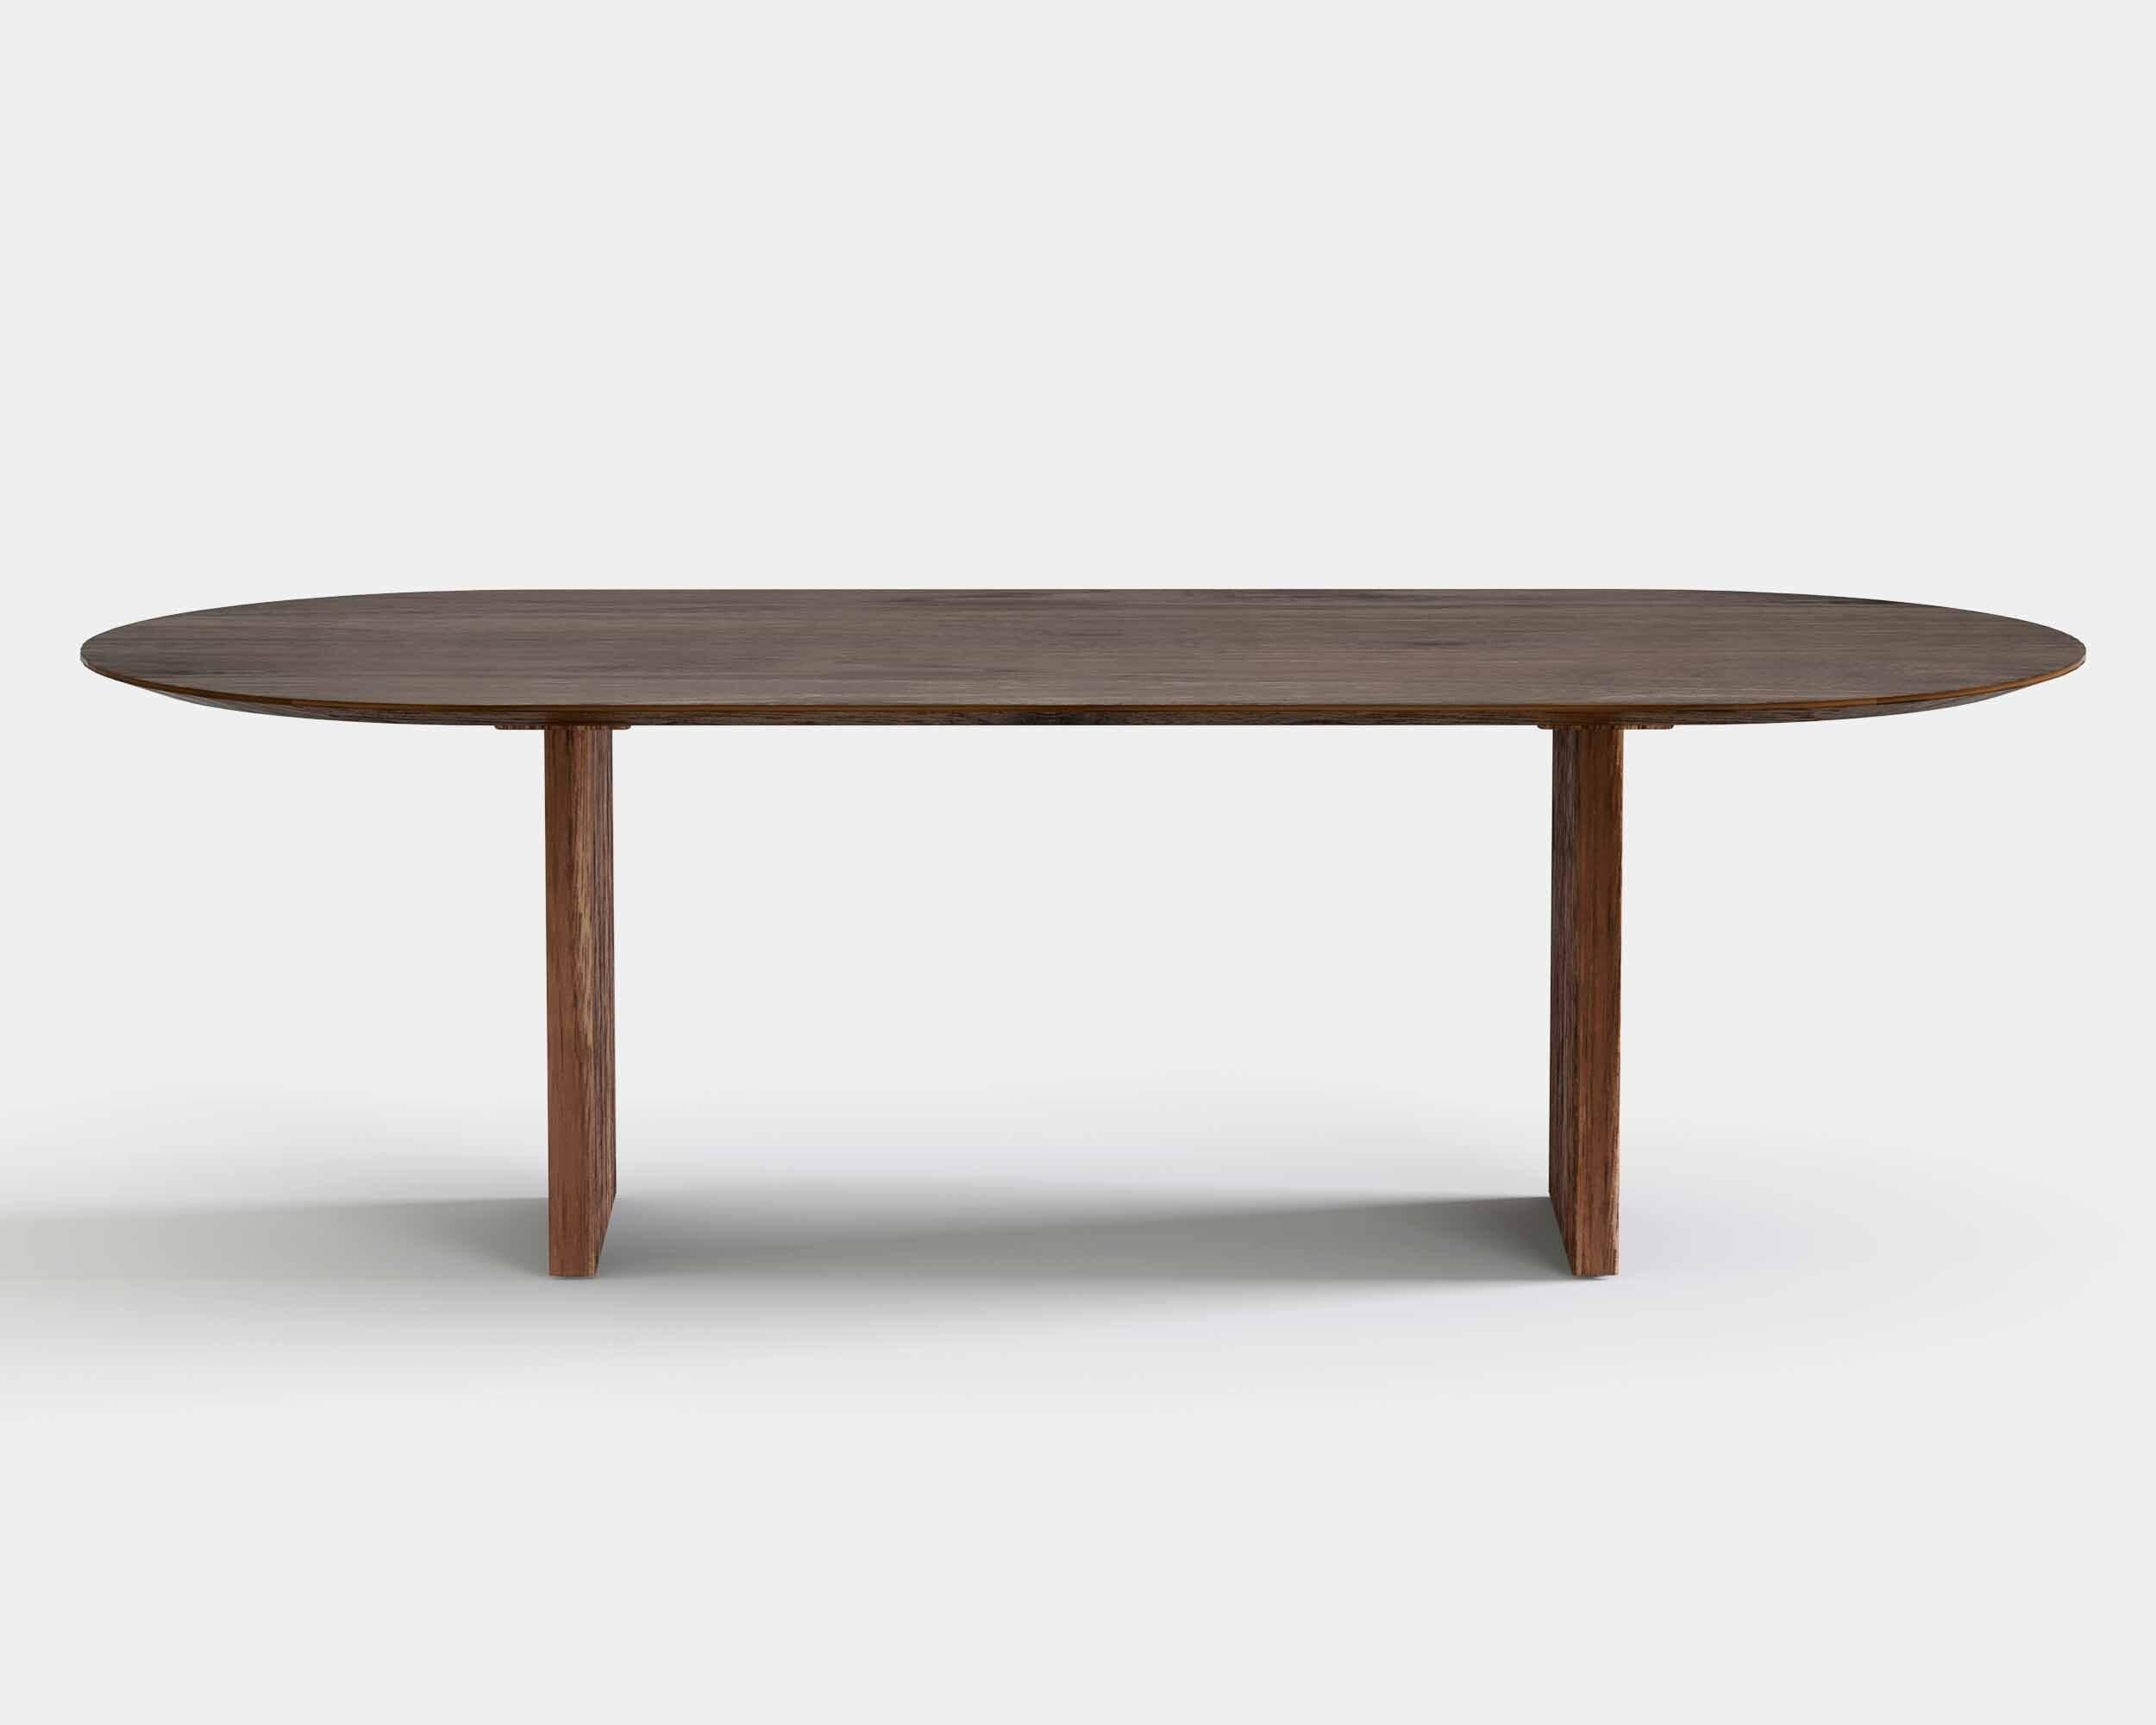 Ten dining table, oval, 270cm.
Solid wood tabletop and legs. Handmade in Denmark. 

Height: 72 or 74 cm

Tabletop dimensions:
– 200 x 95 cm
– 240 x 105 cm
– 270 x 105 cm
– 300 x 105 cm
– 340 x 105 cm
– 370 x 105 cm
– 400 x 105